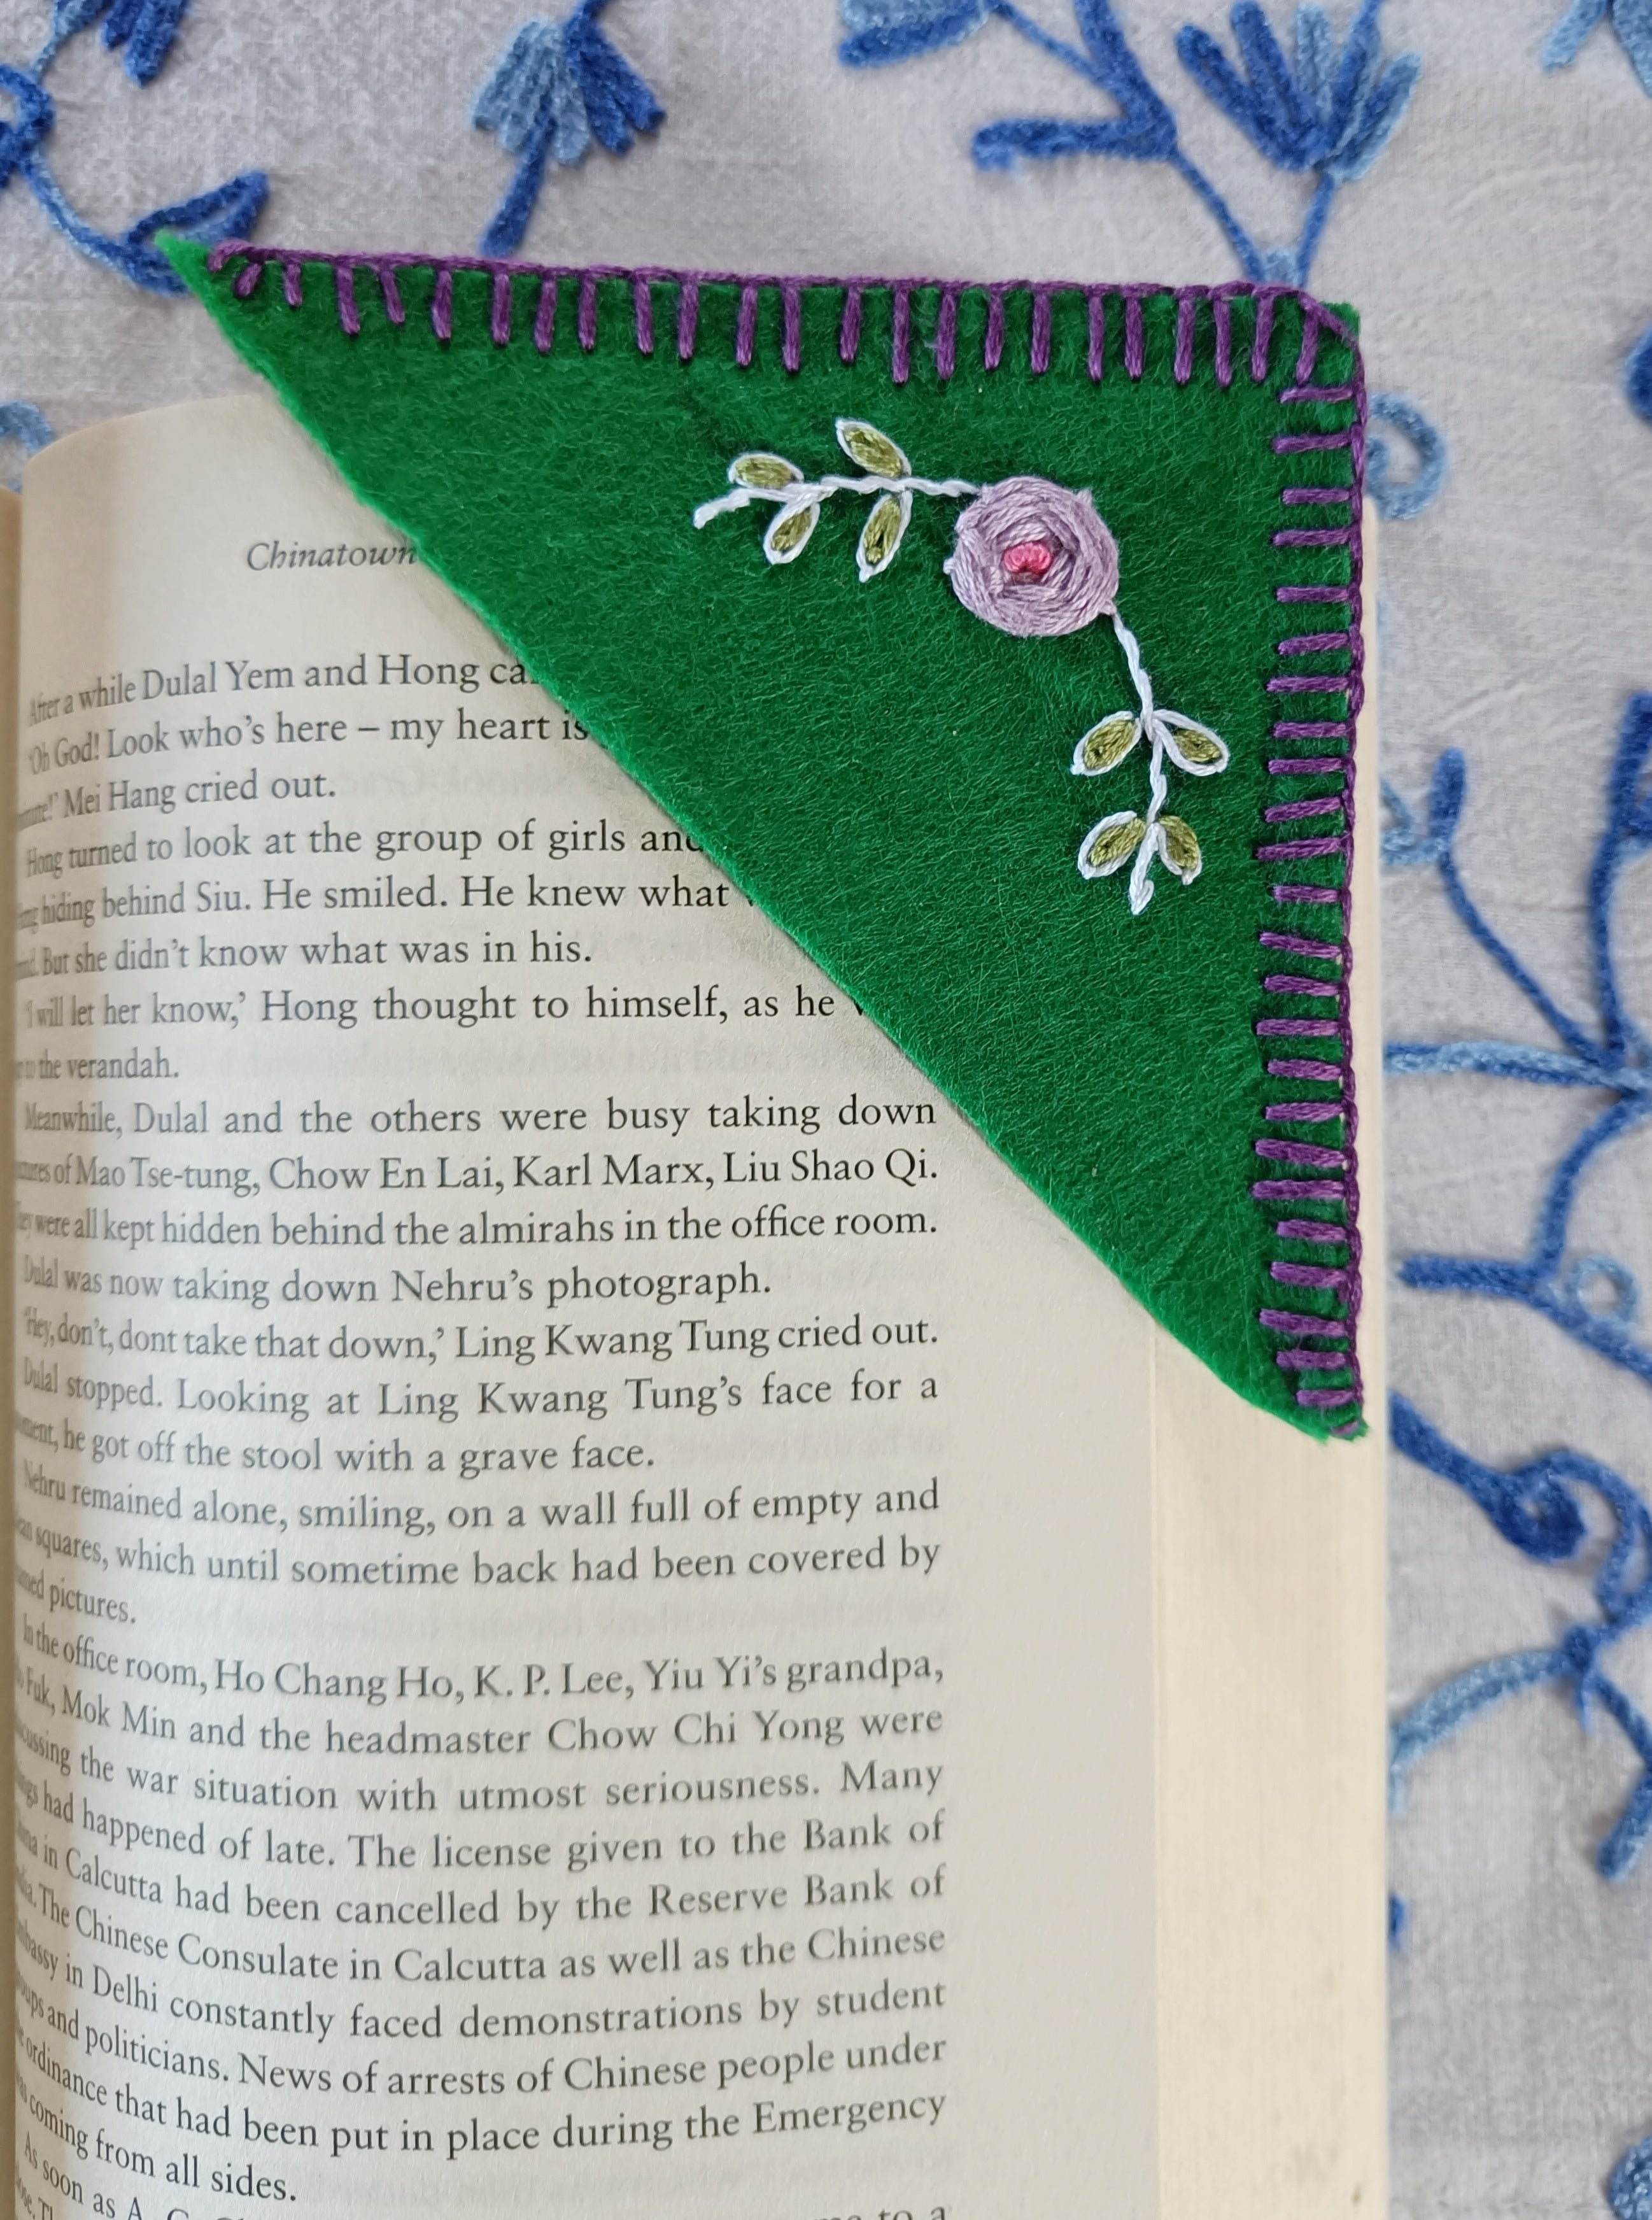 Set of 4: Triangle-shaped Hand embroidered bookmarks